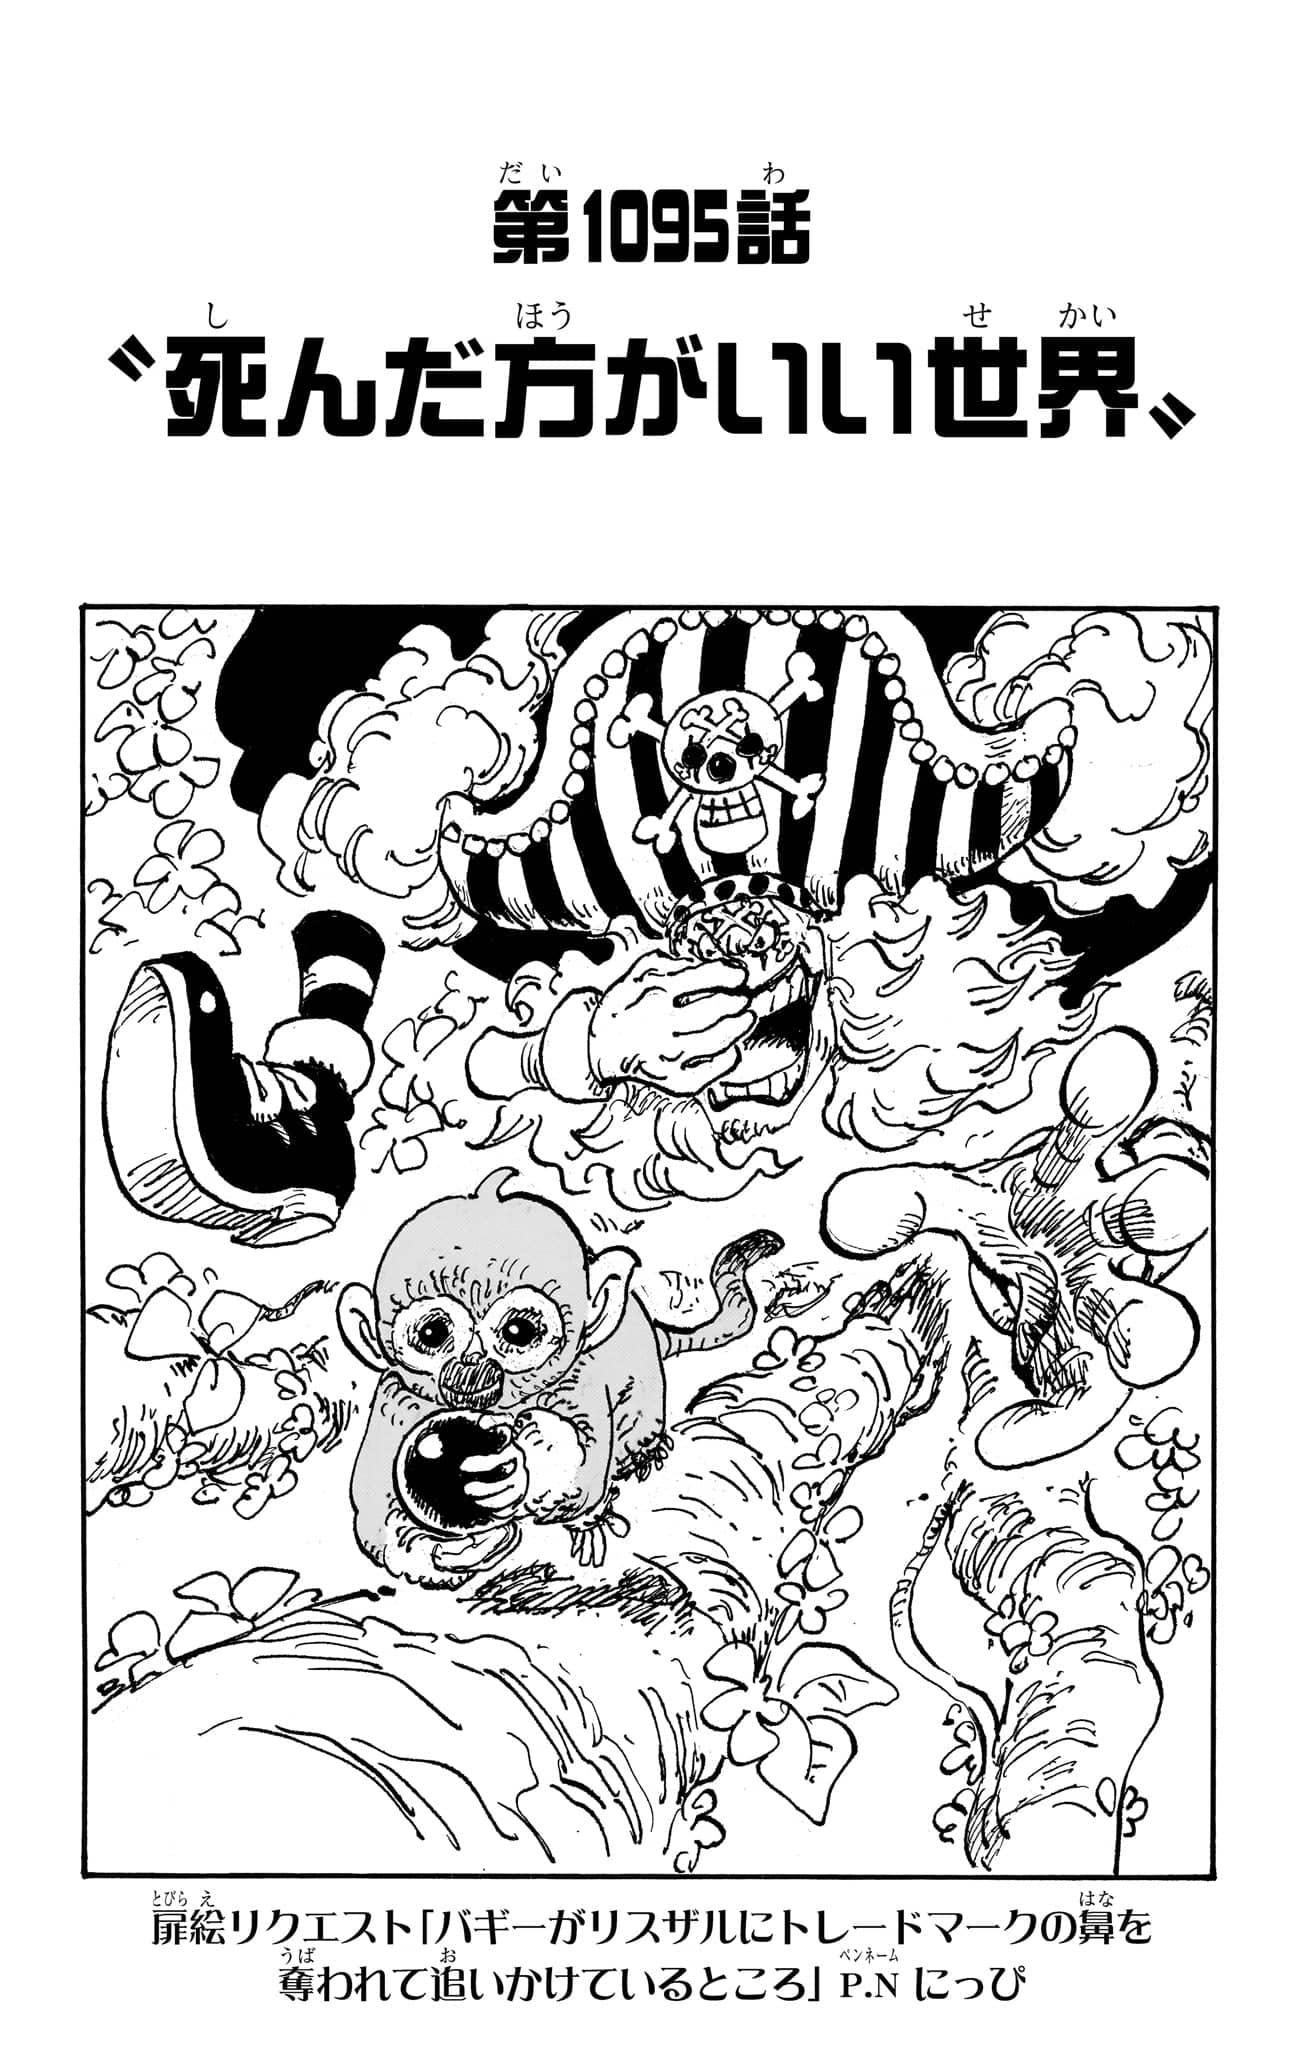 One Piece Chapter 1061 Release Date, Time, & What To Expect